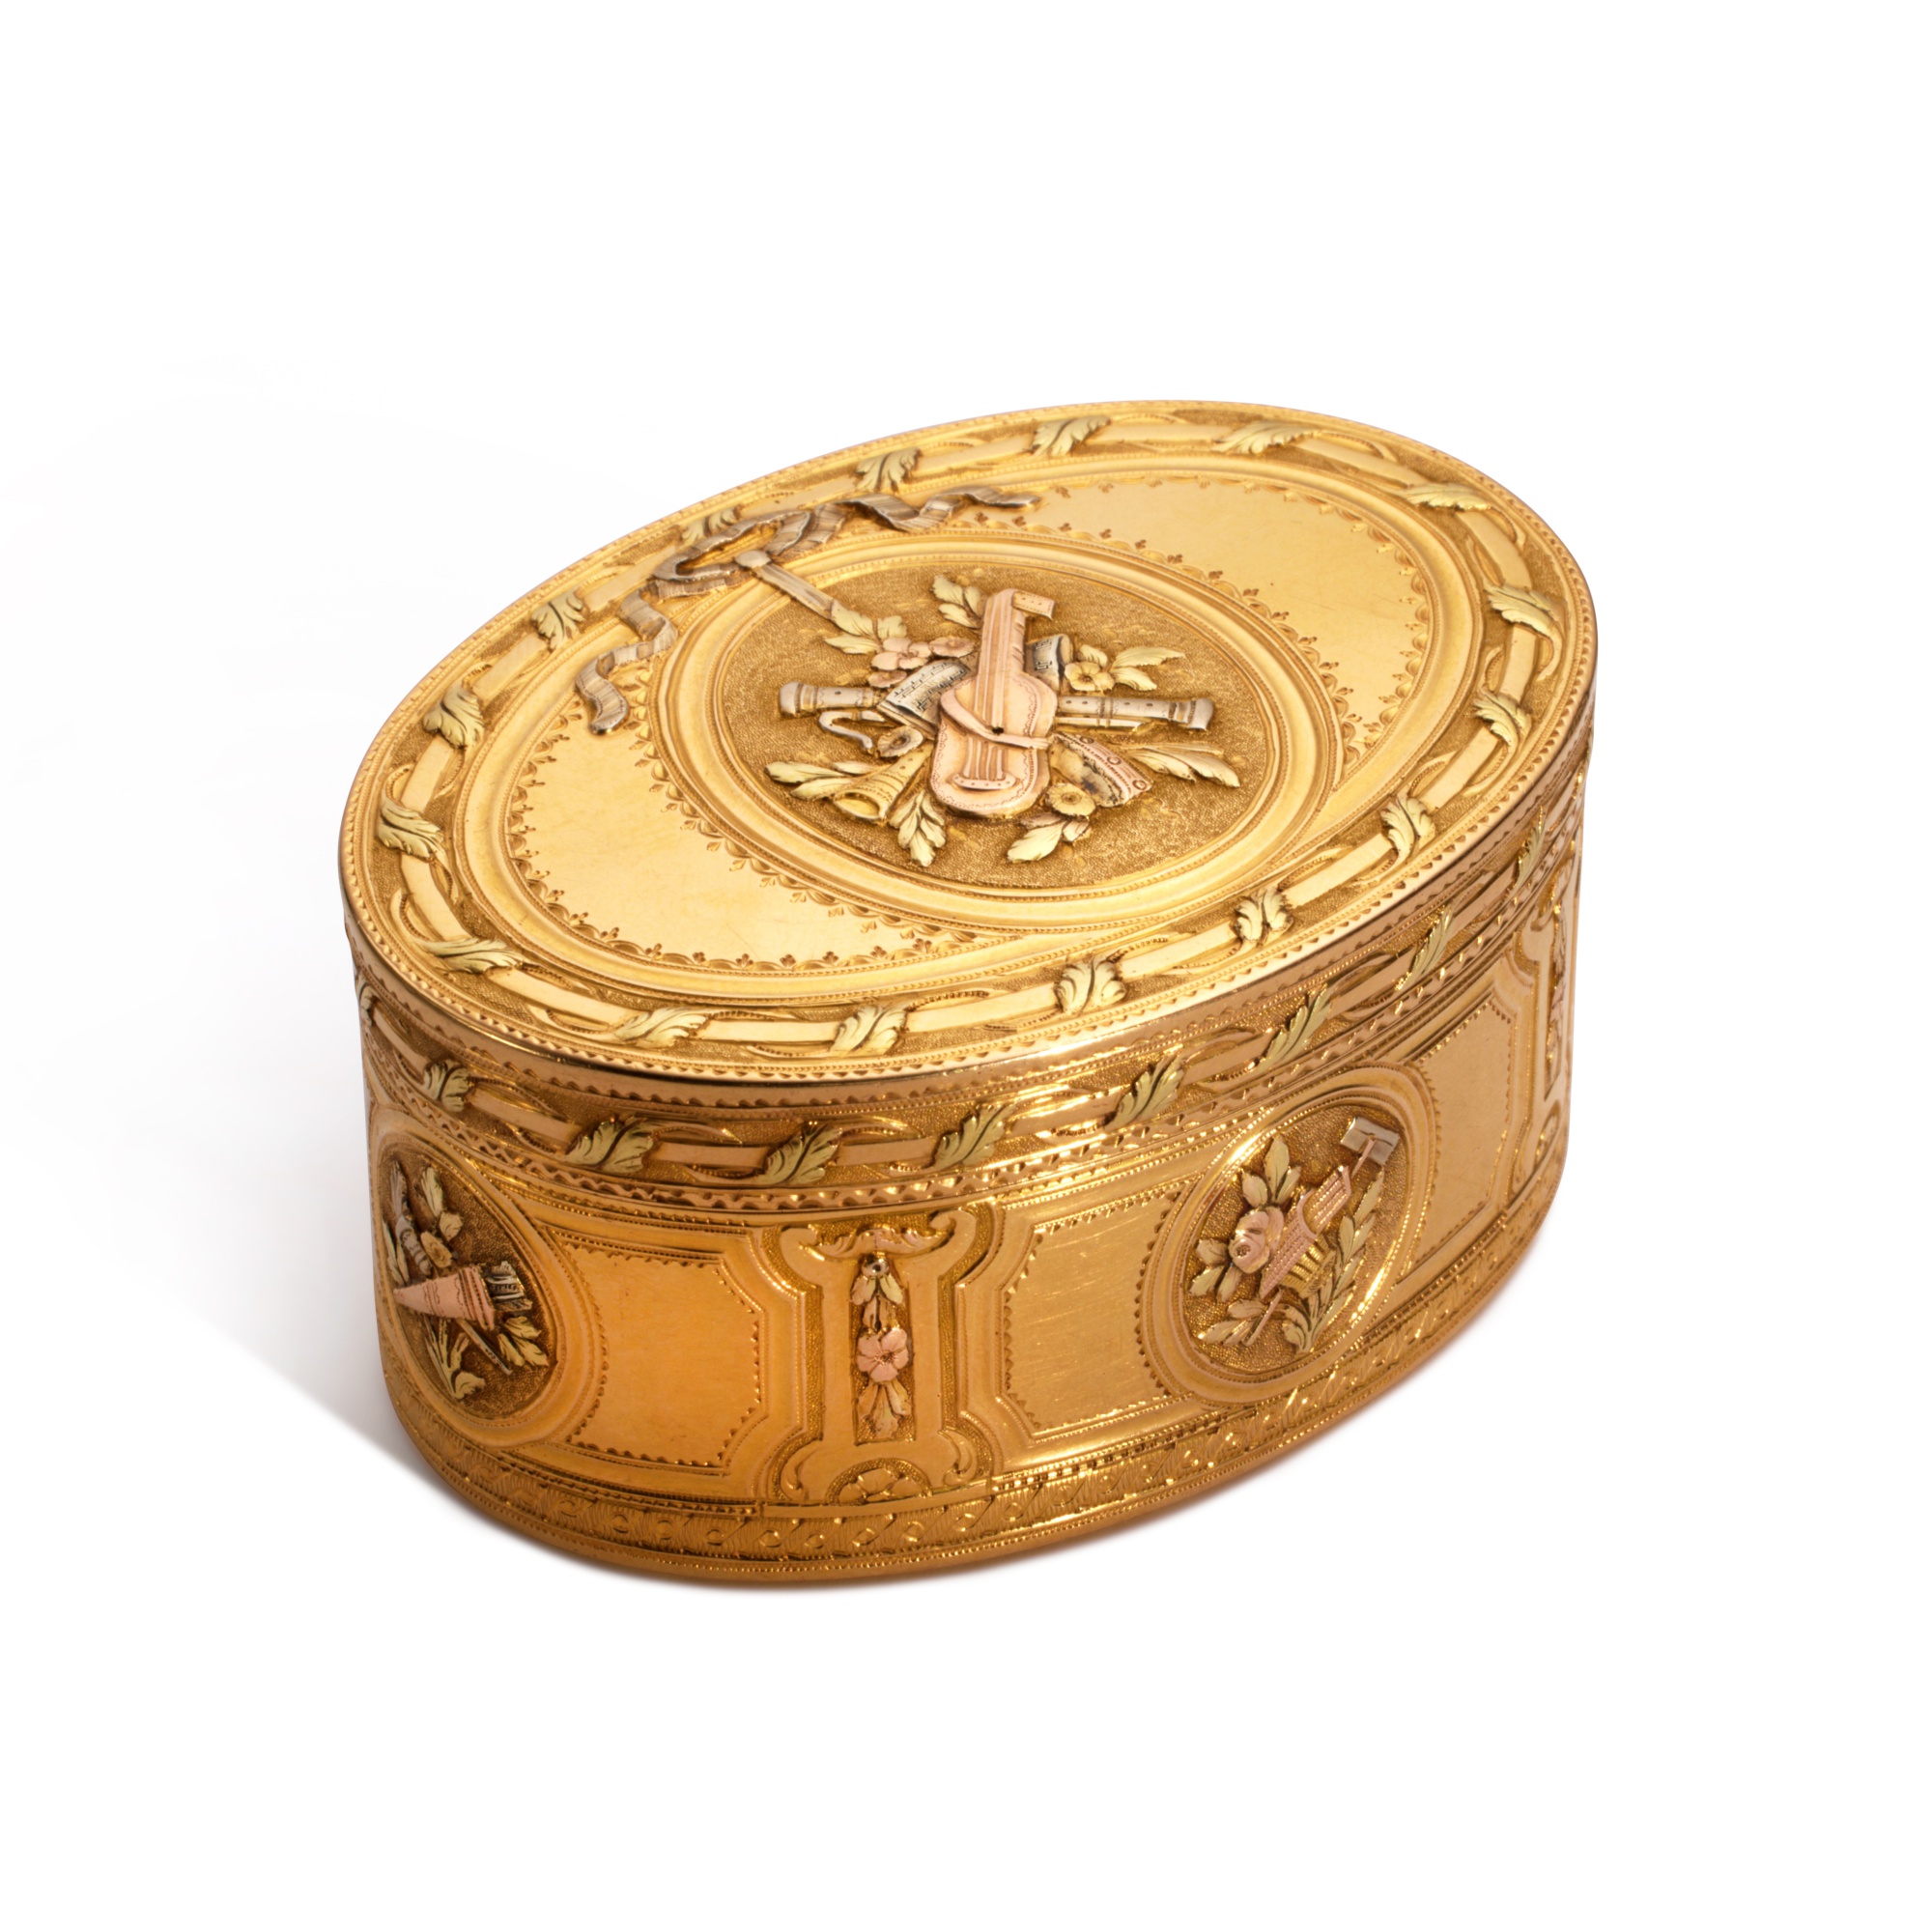 A Louis XV Vari-Color Gold Oval Snuff Box, Pierre-Fran&#231;ois Royer, Paris, 1769, with the Charge - Image 3 of 5